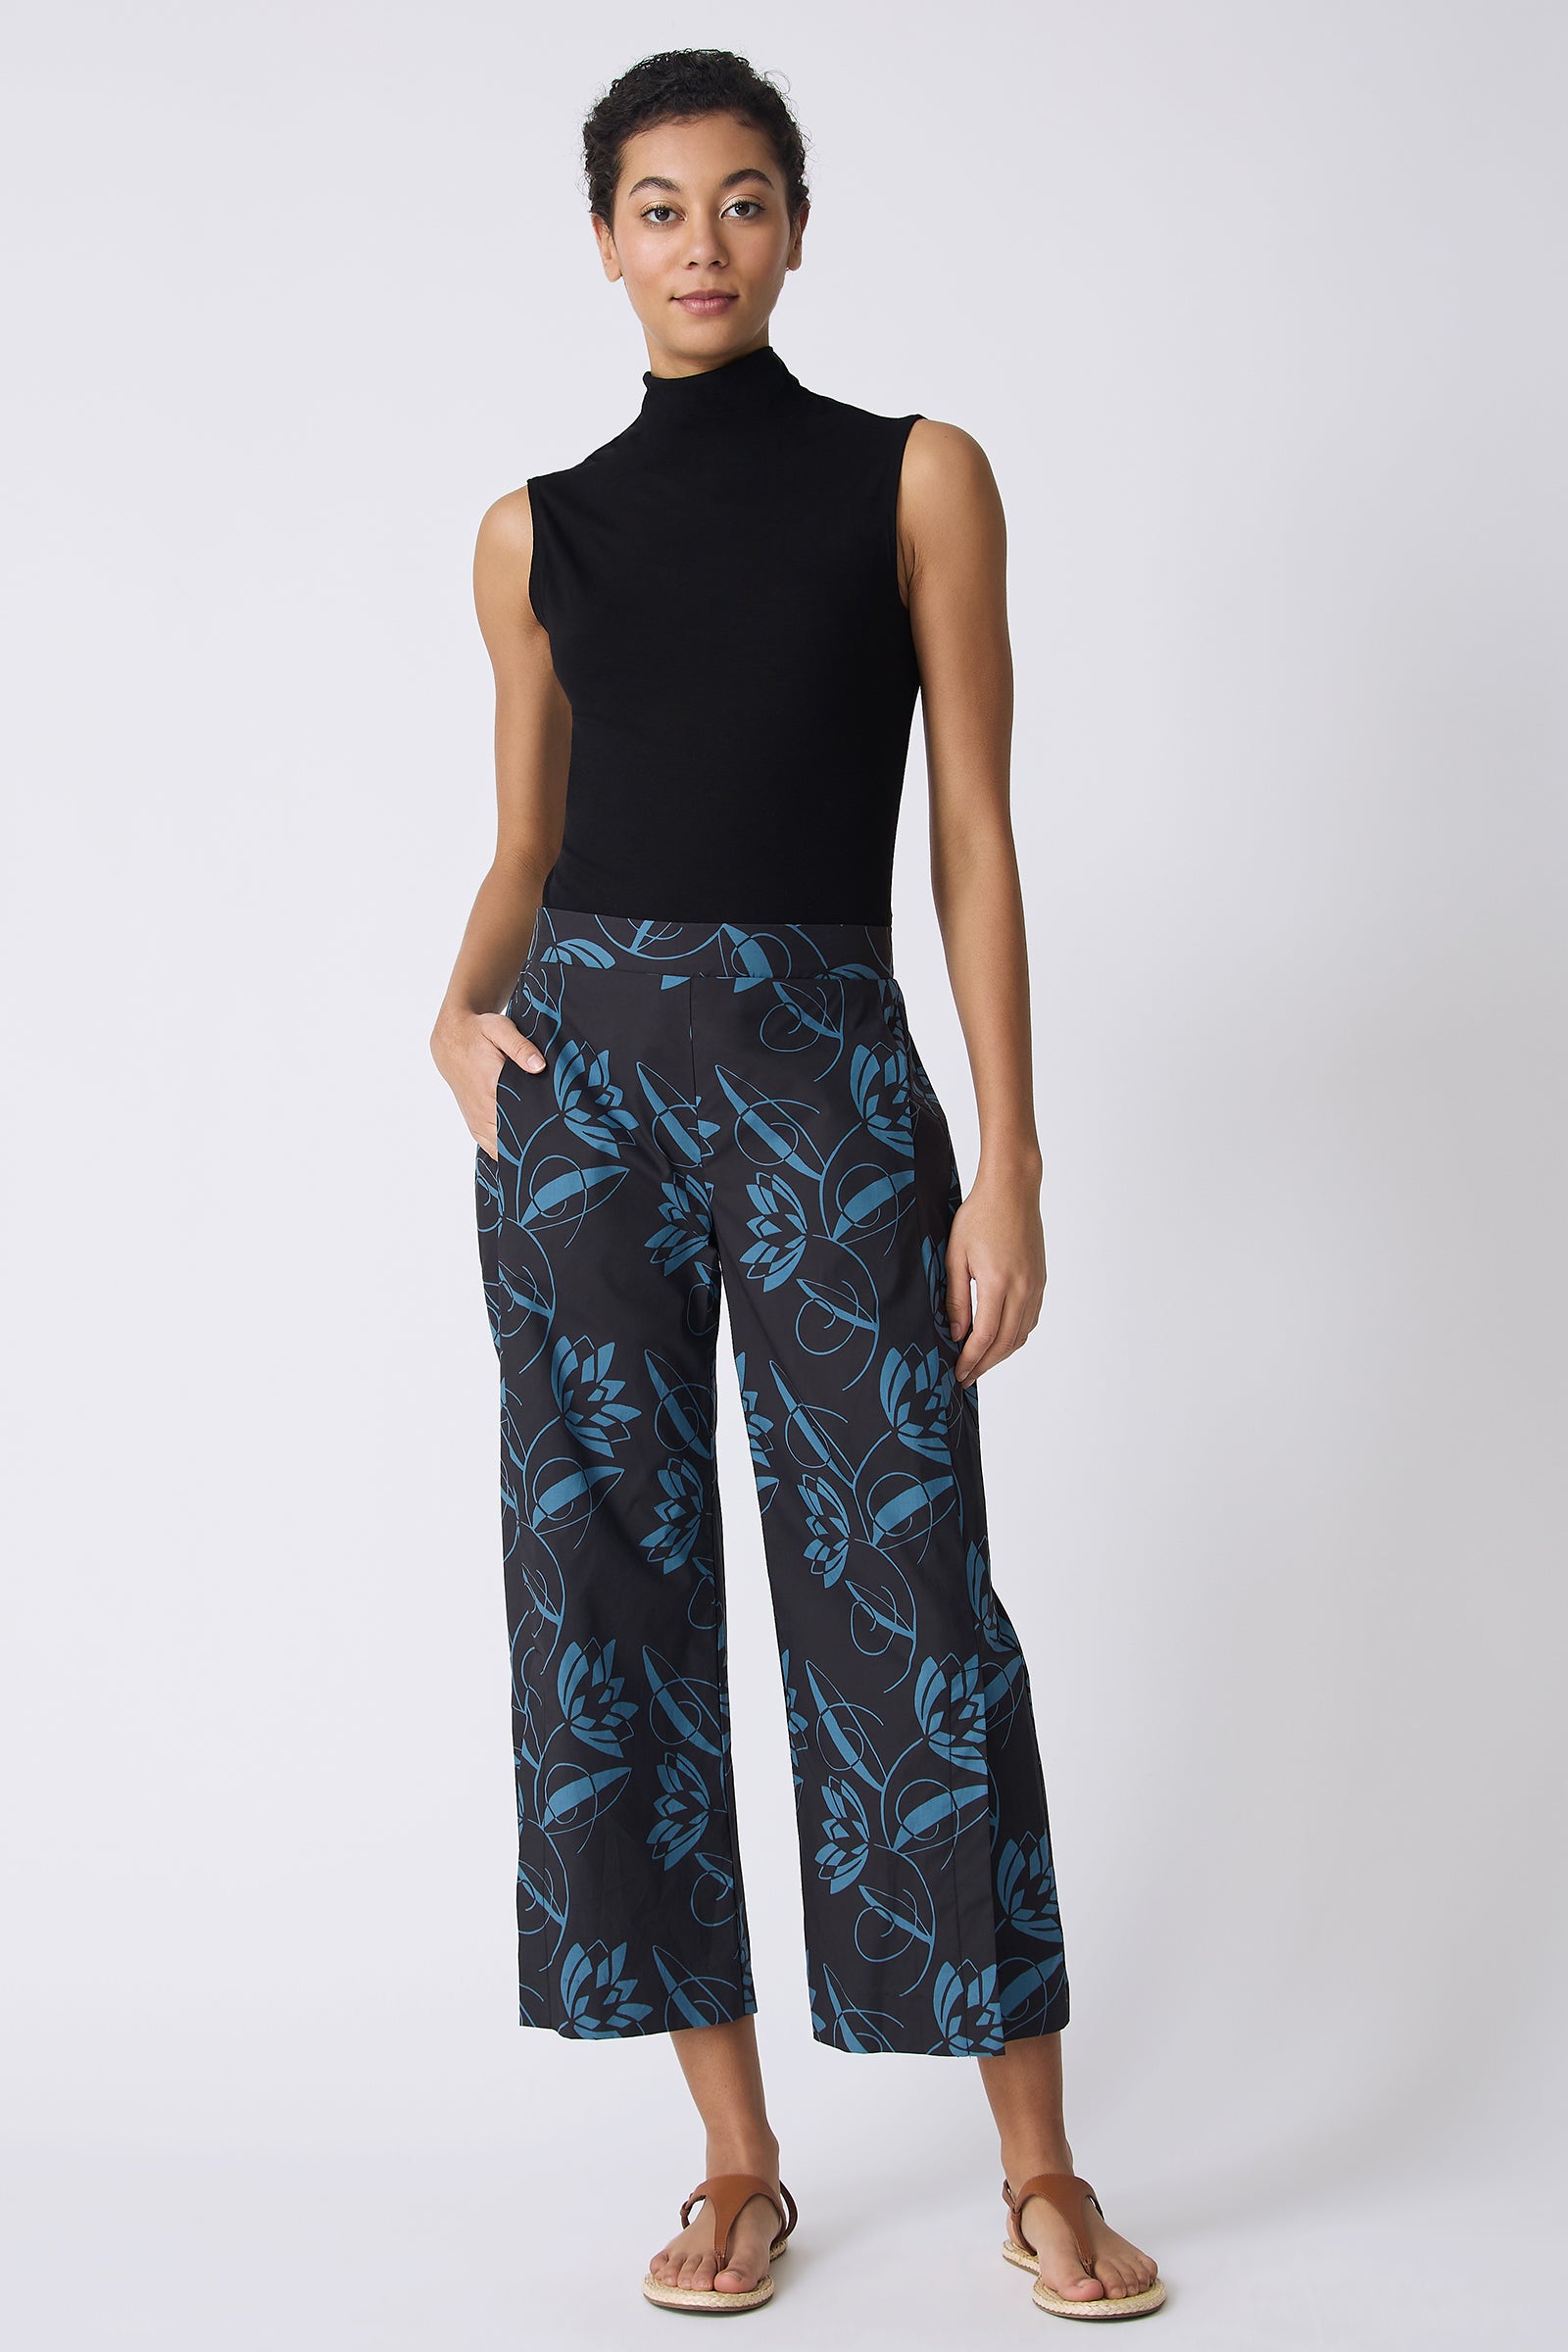 Lucy Women's Lotus Pant Lucy Black 2 Pants : Amazon.in: Clothing &  Accessories